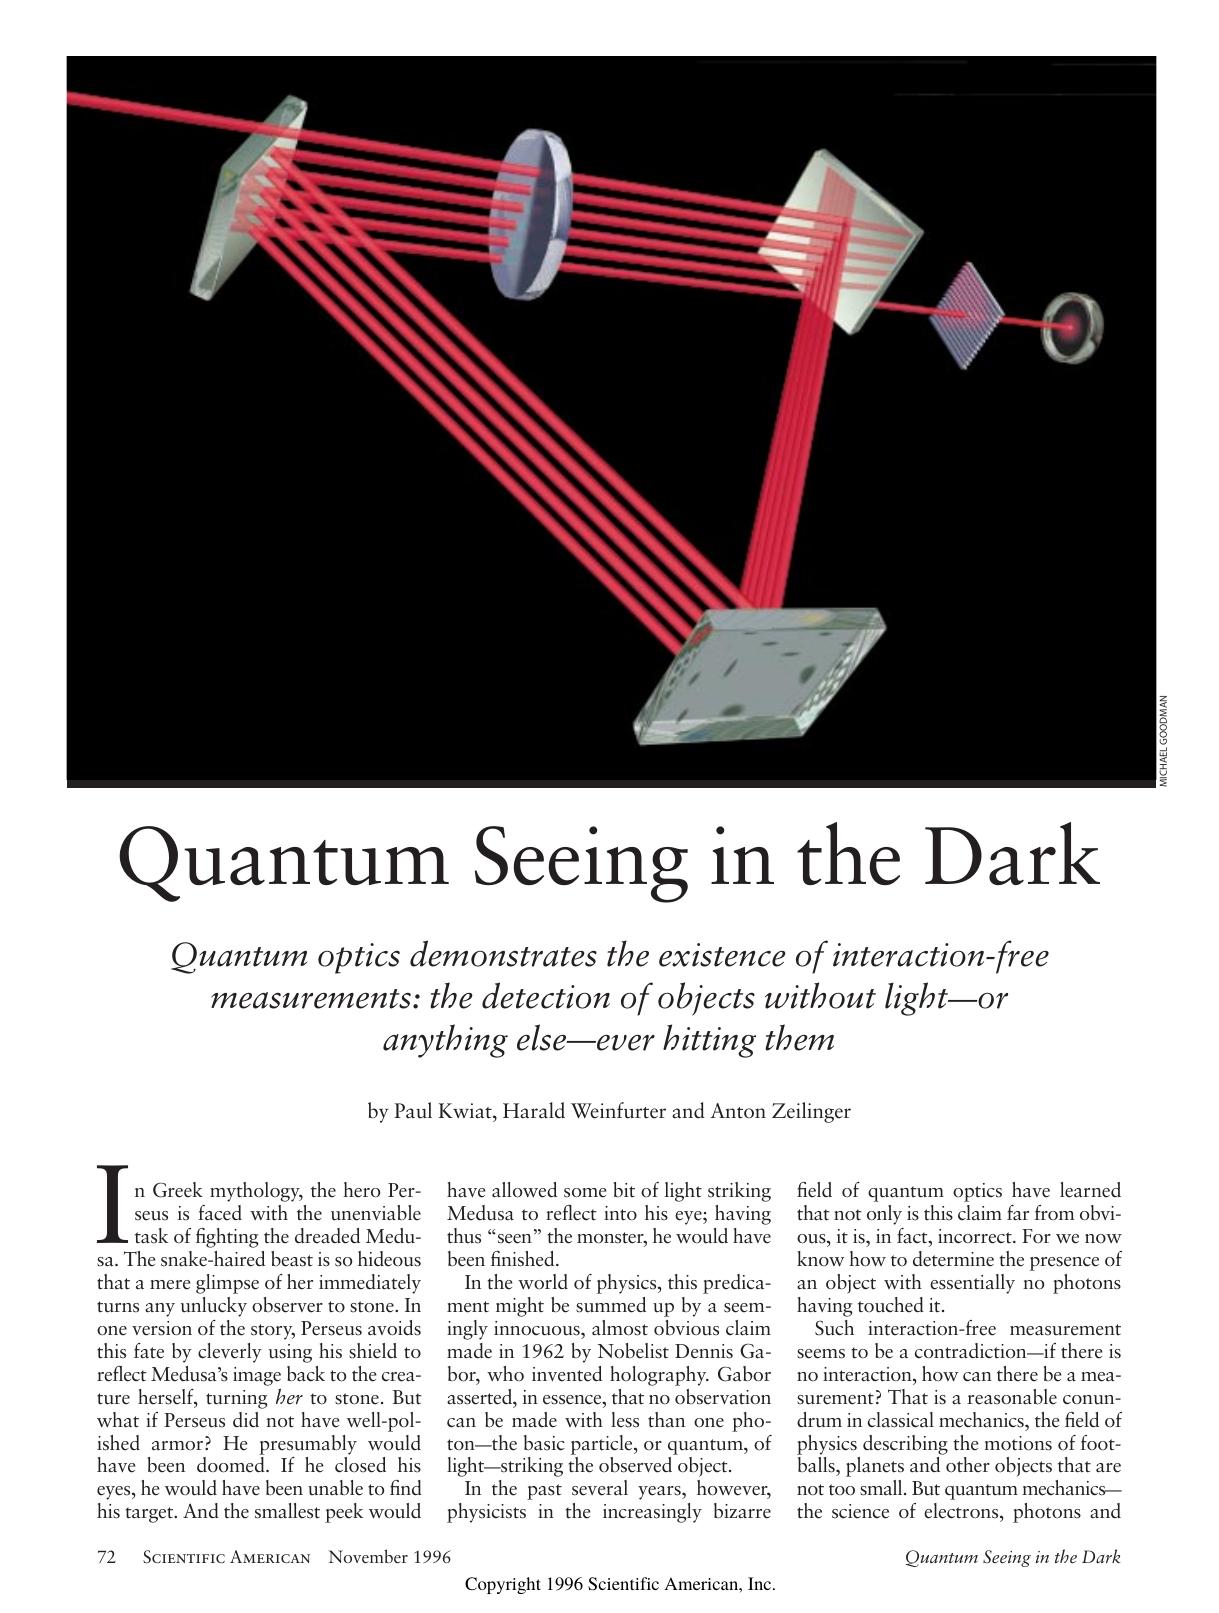 Quantum Seeing in the Dark (1996) by Unknown